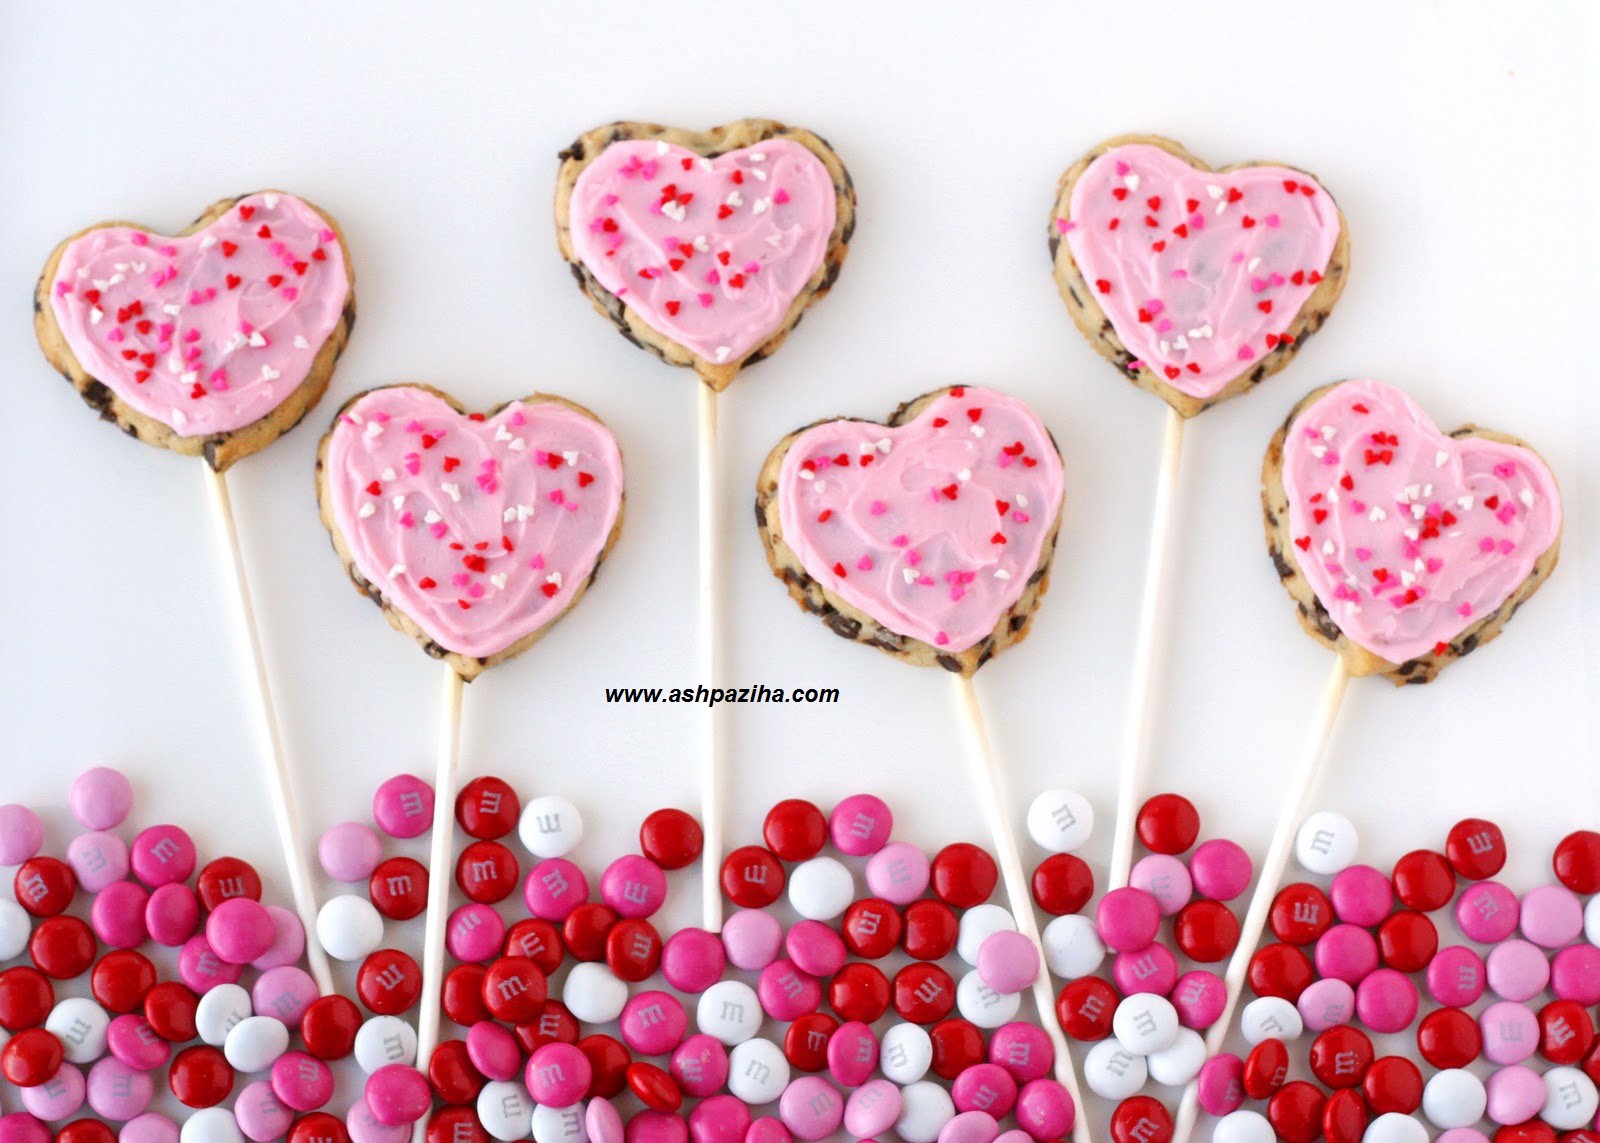 15. Model - decoration - Sweets - Candy - Heart - especially - Valentine (12)